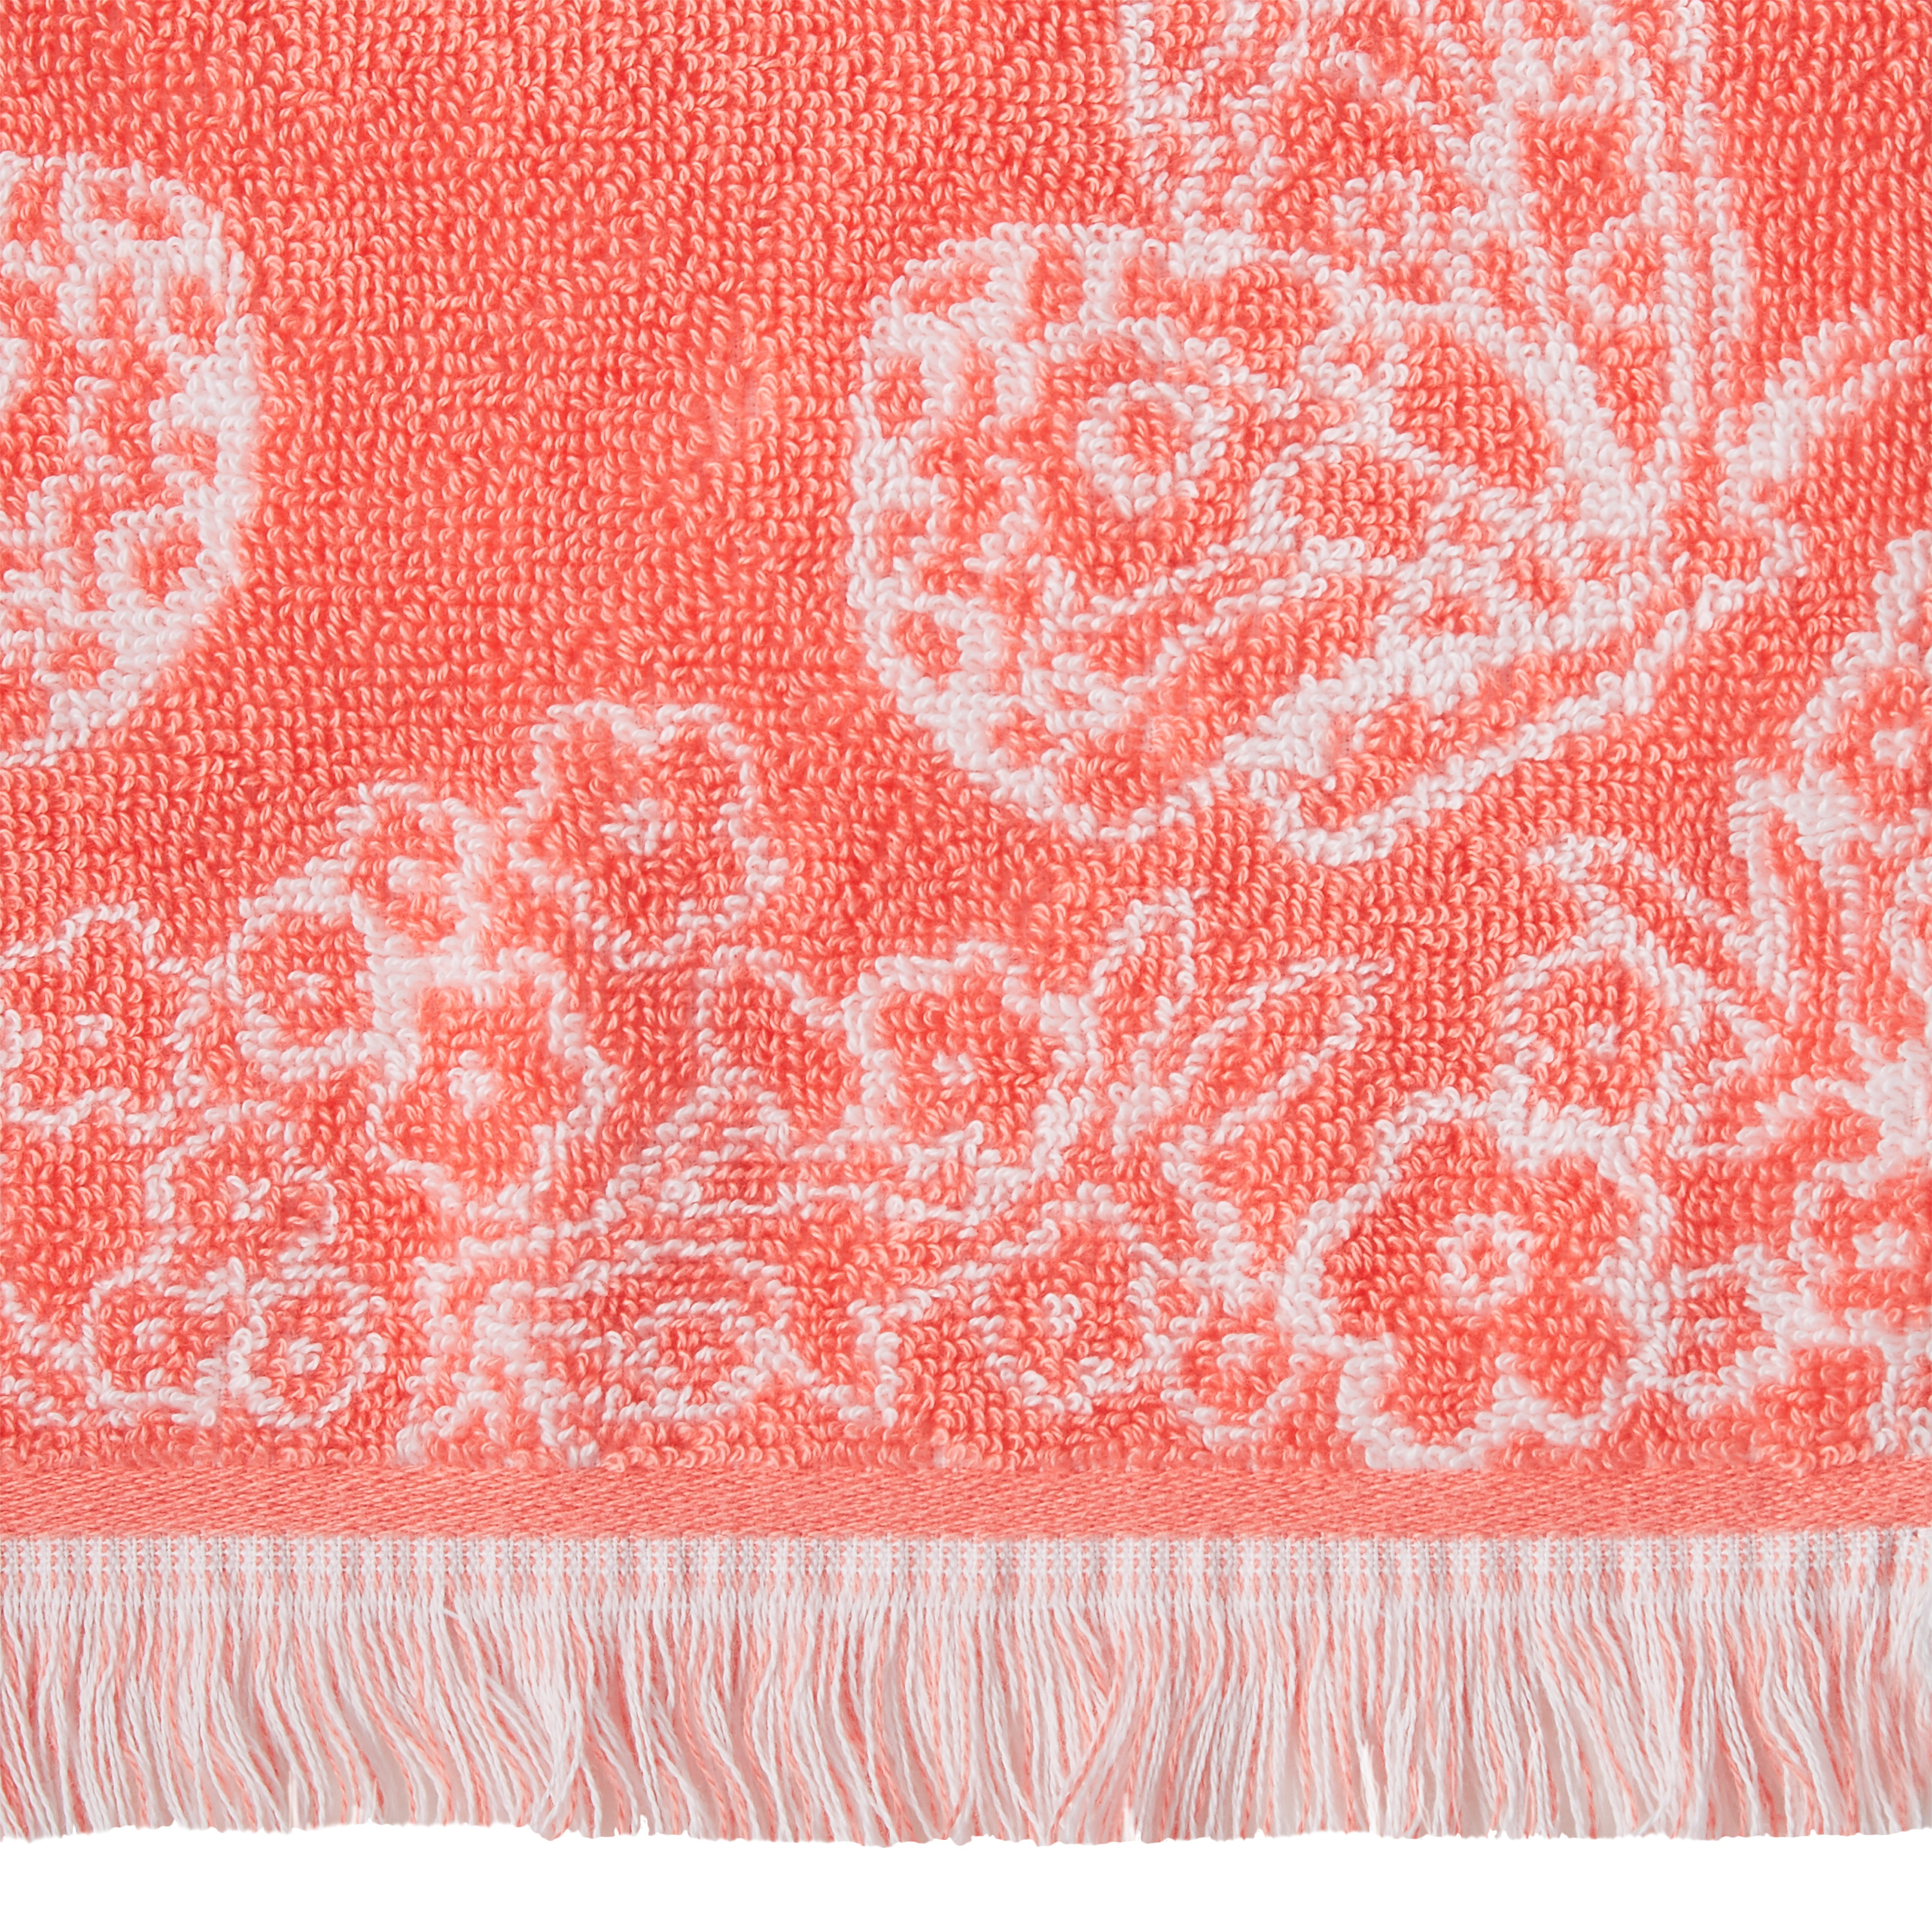 The Pioneer Woman Butterfly Garden 2-Pack Cotton Hand Towel Set, Coral Bell - image 4 of 5